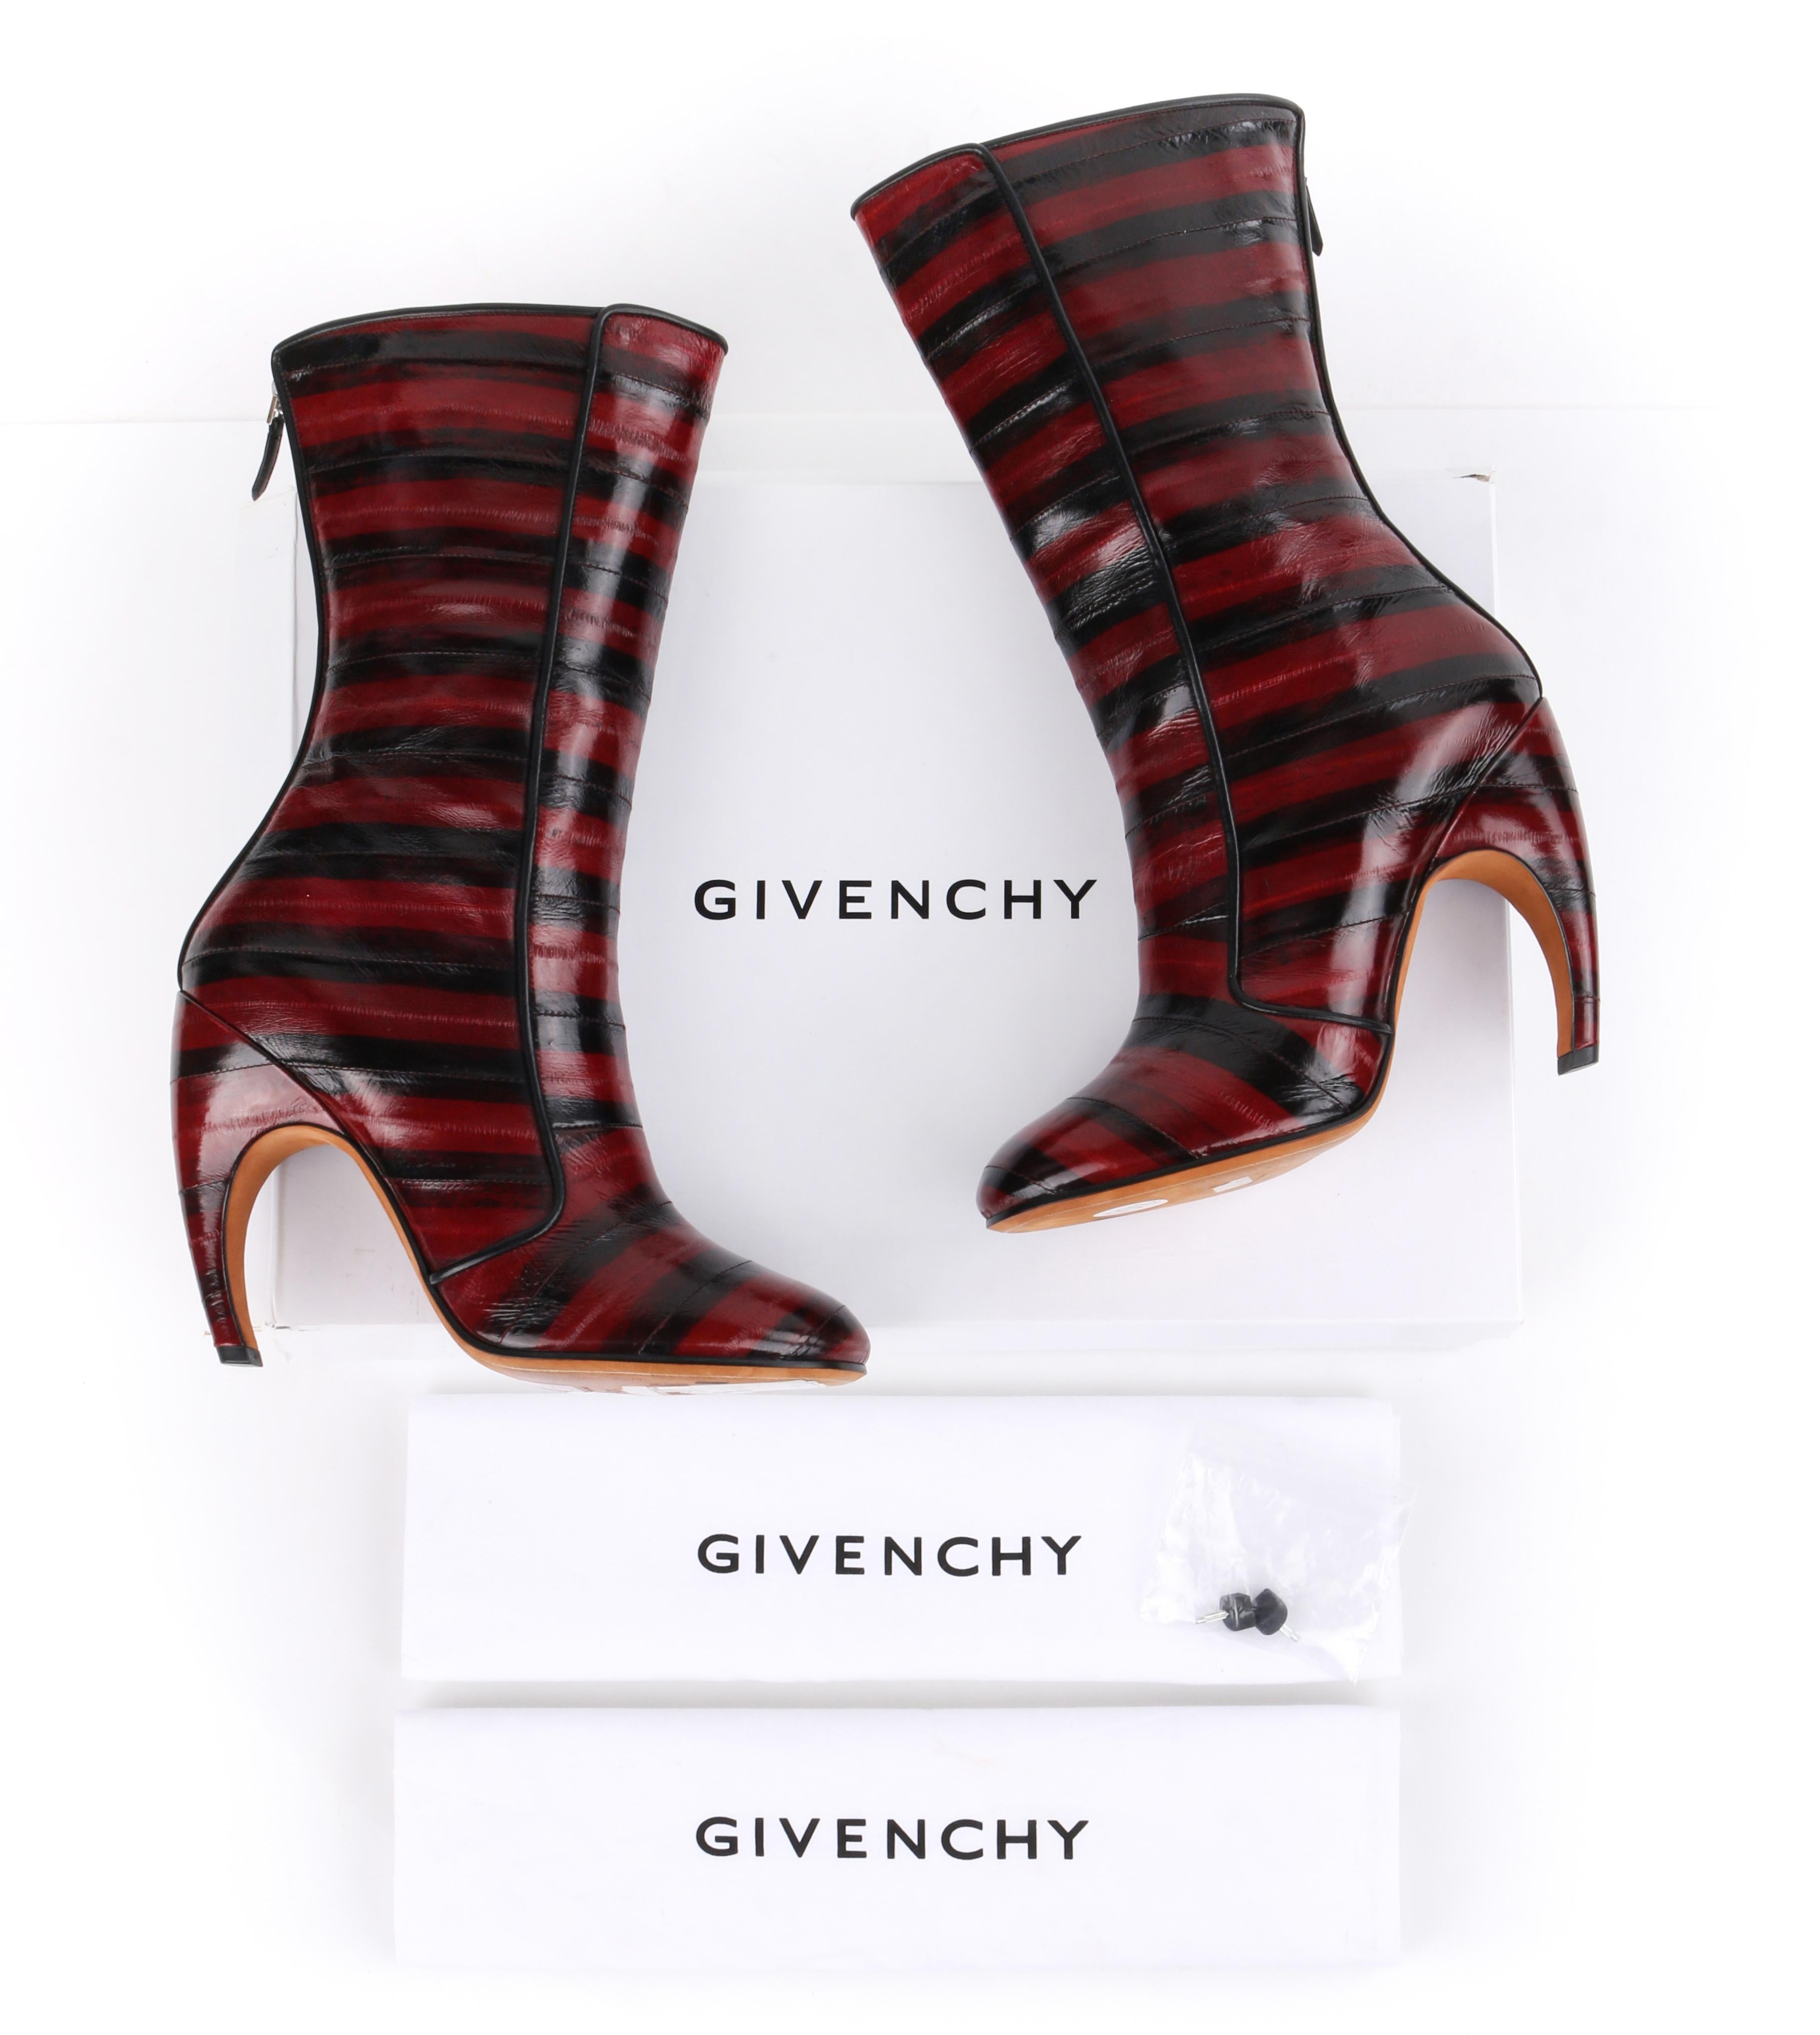 GIVENCHY Burgundy Black Stripe Eel Calf Skin Leather Zip Up Boots Heels
 
Estimated Retail: $1,550
 
Brand / Manufacturer: Givenchy
Designer: Clare Waight Keller
Style: Boots
Color(s): Shades of red and black
Unmarked Materials: Eel Skin (exterior);